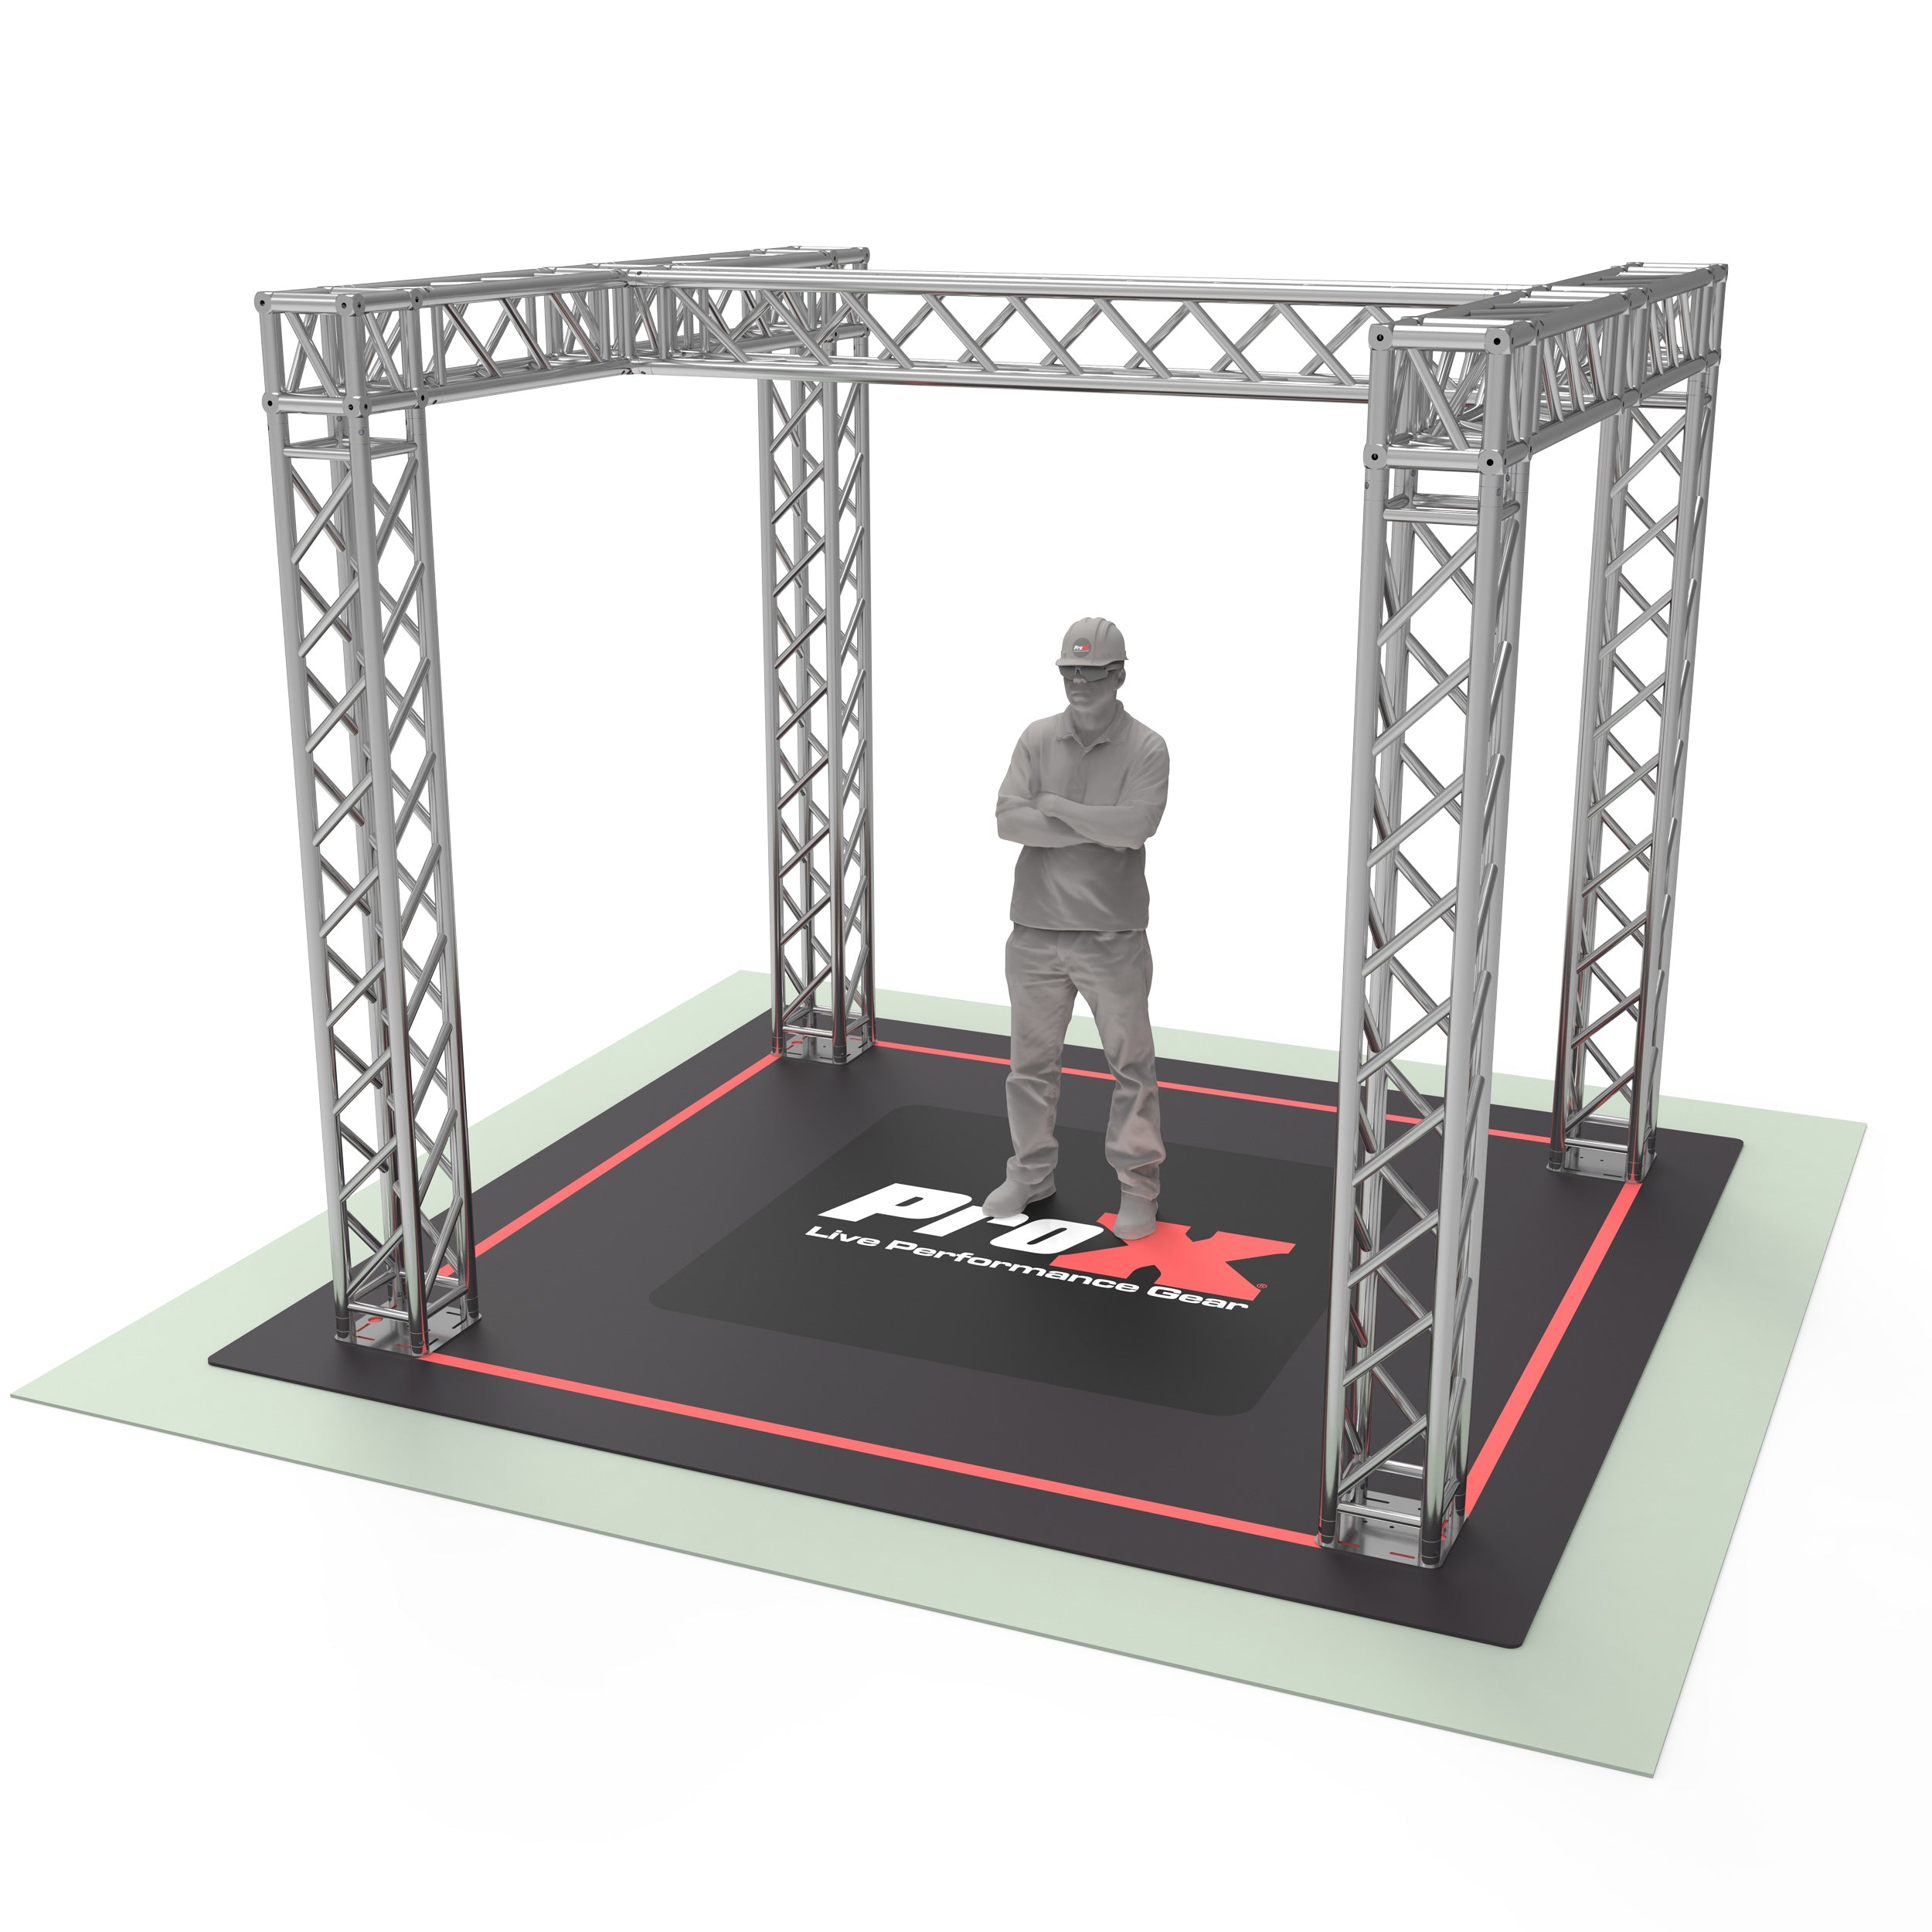 Pro X Tradeshow Booth 9.42 W X 9.42 L X 9.20 FT H with H Shape Design in center - K SERIES Light Duty KTP-E1099H